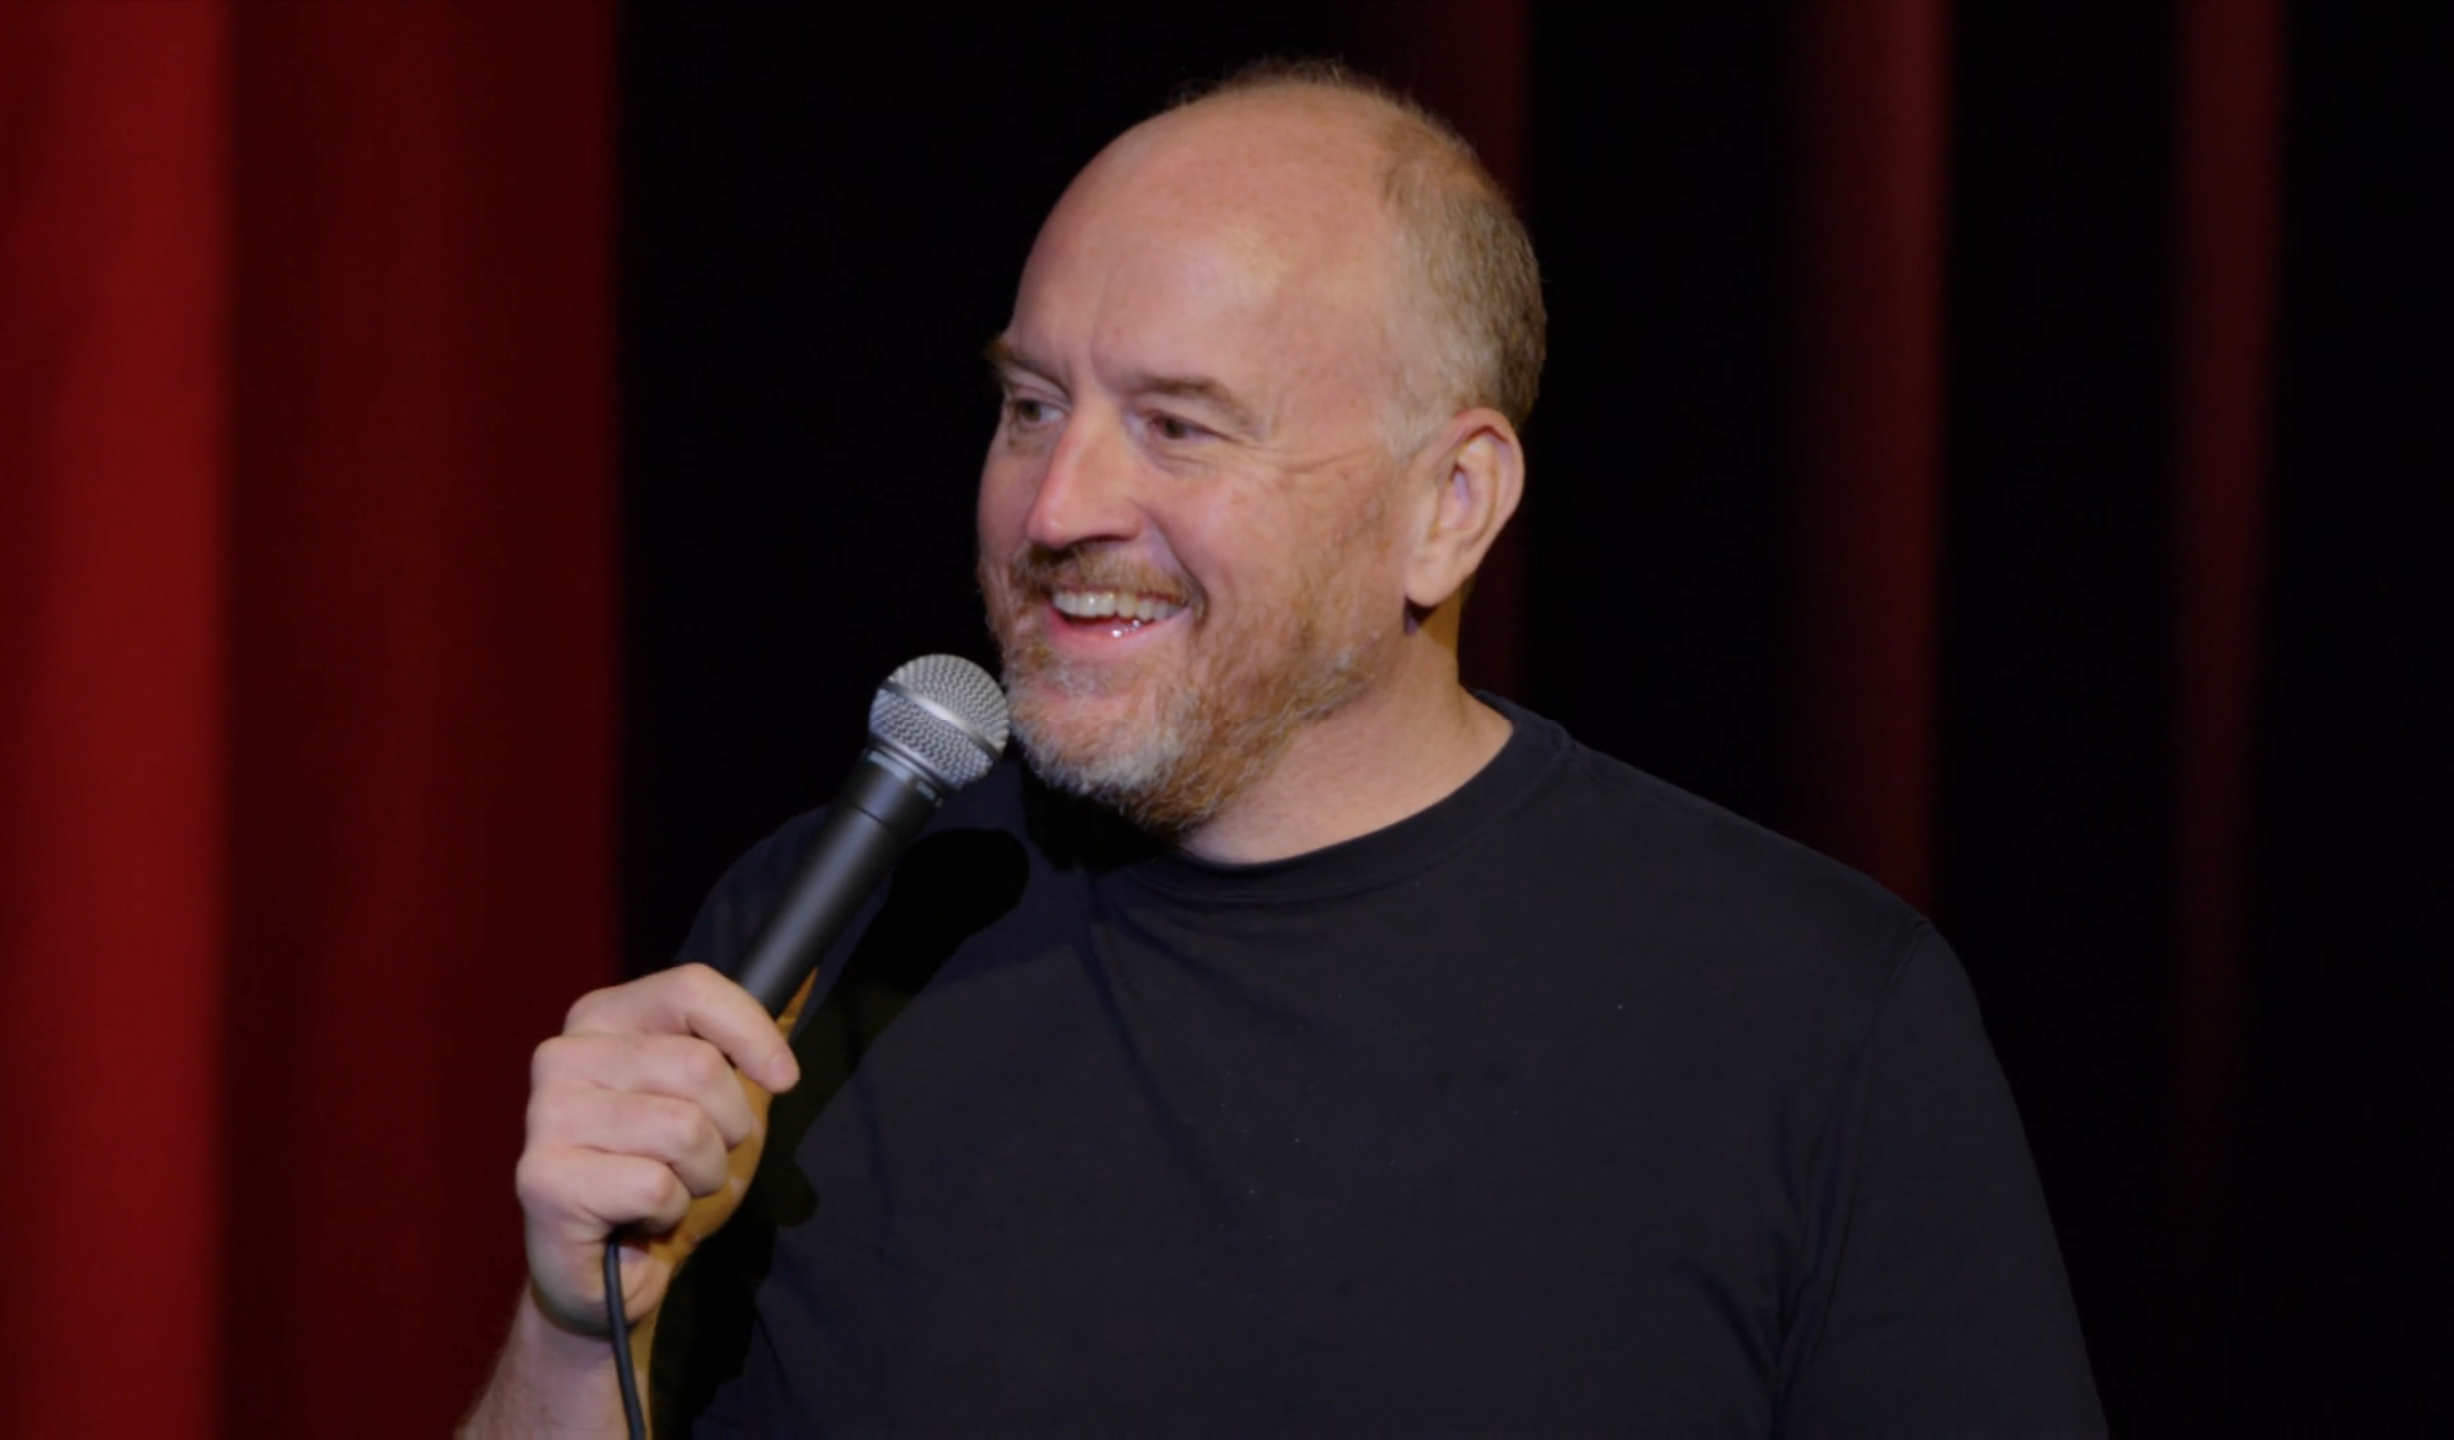 Review: “Sincerely Louis C.K.” on louisck.com